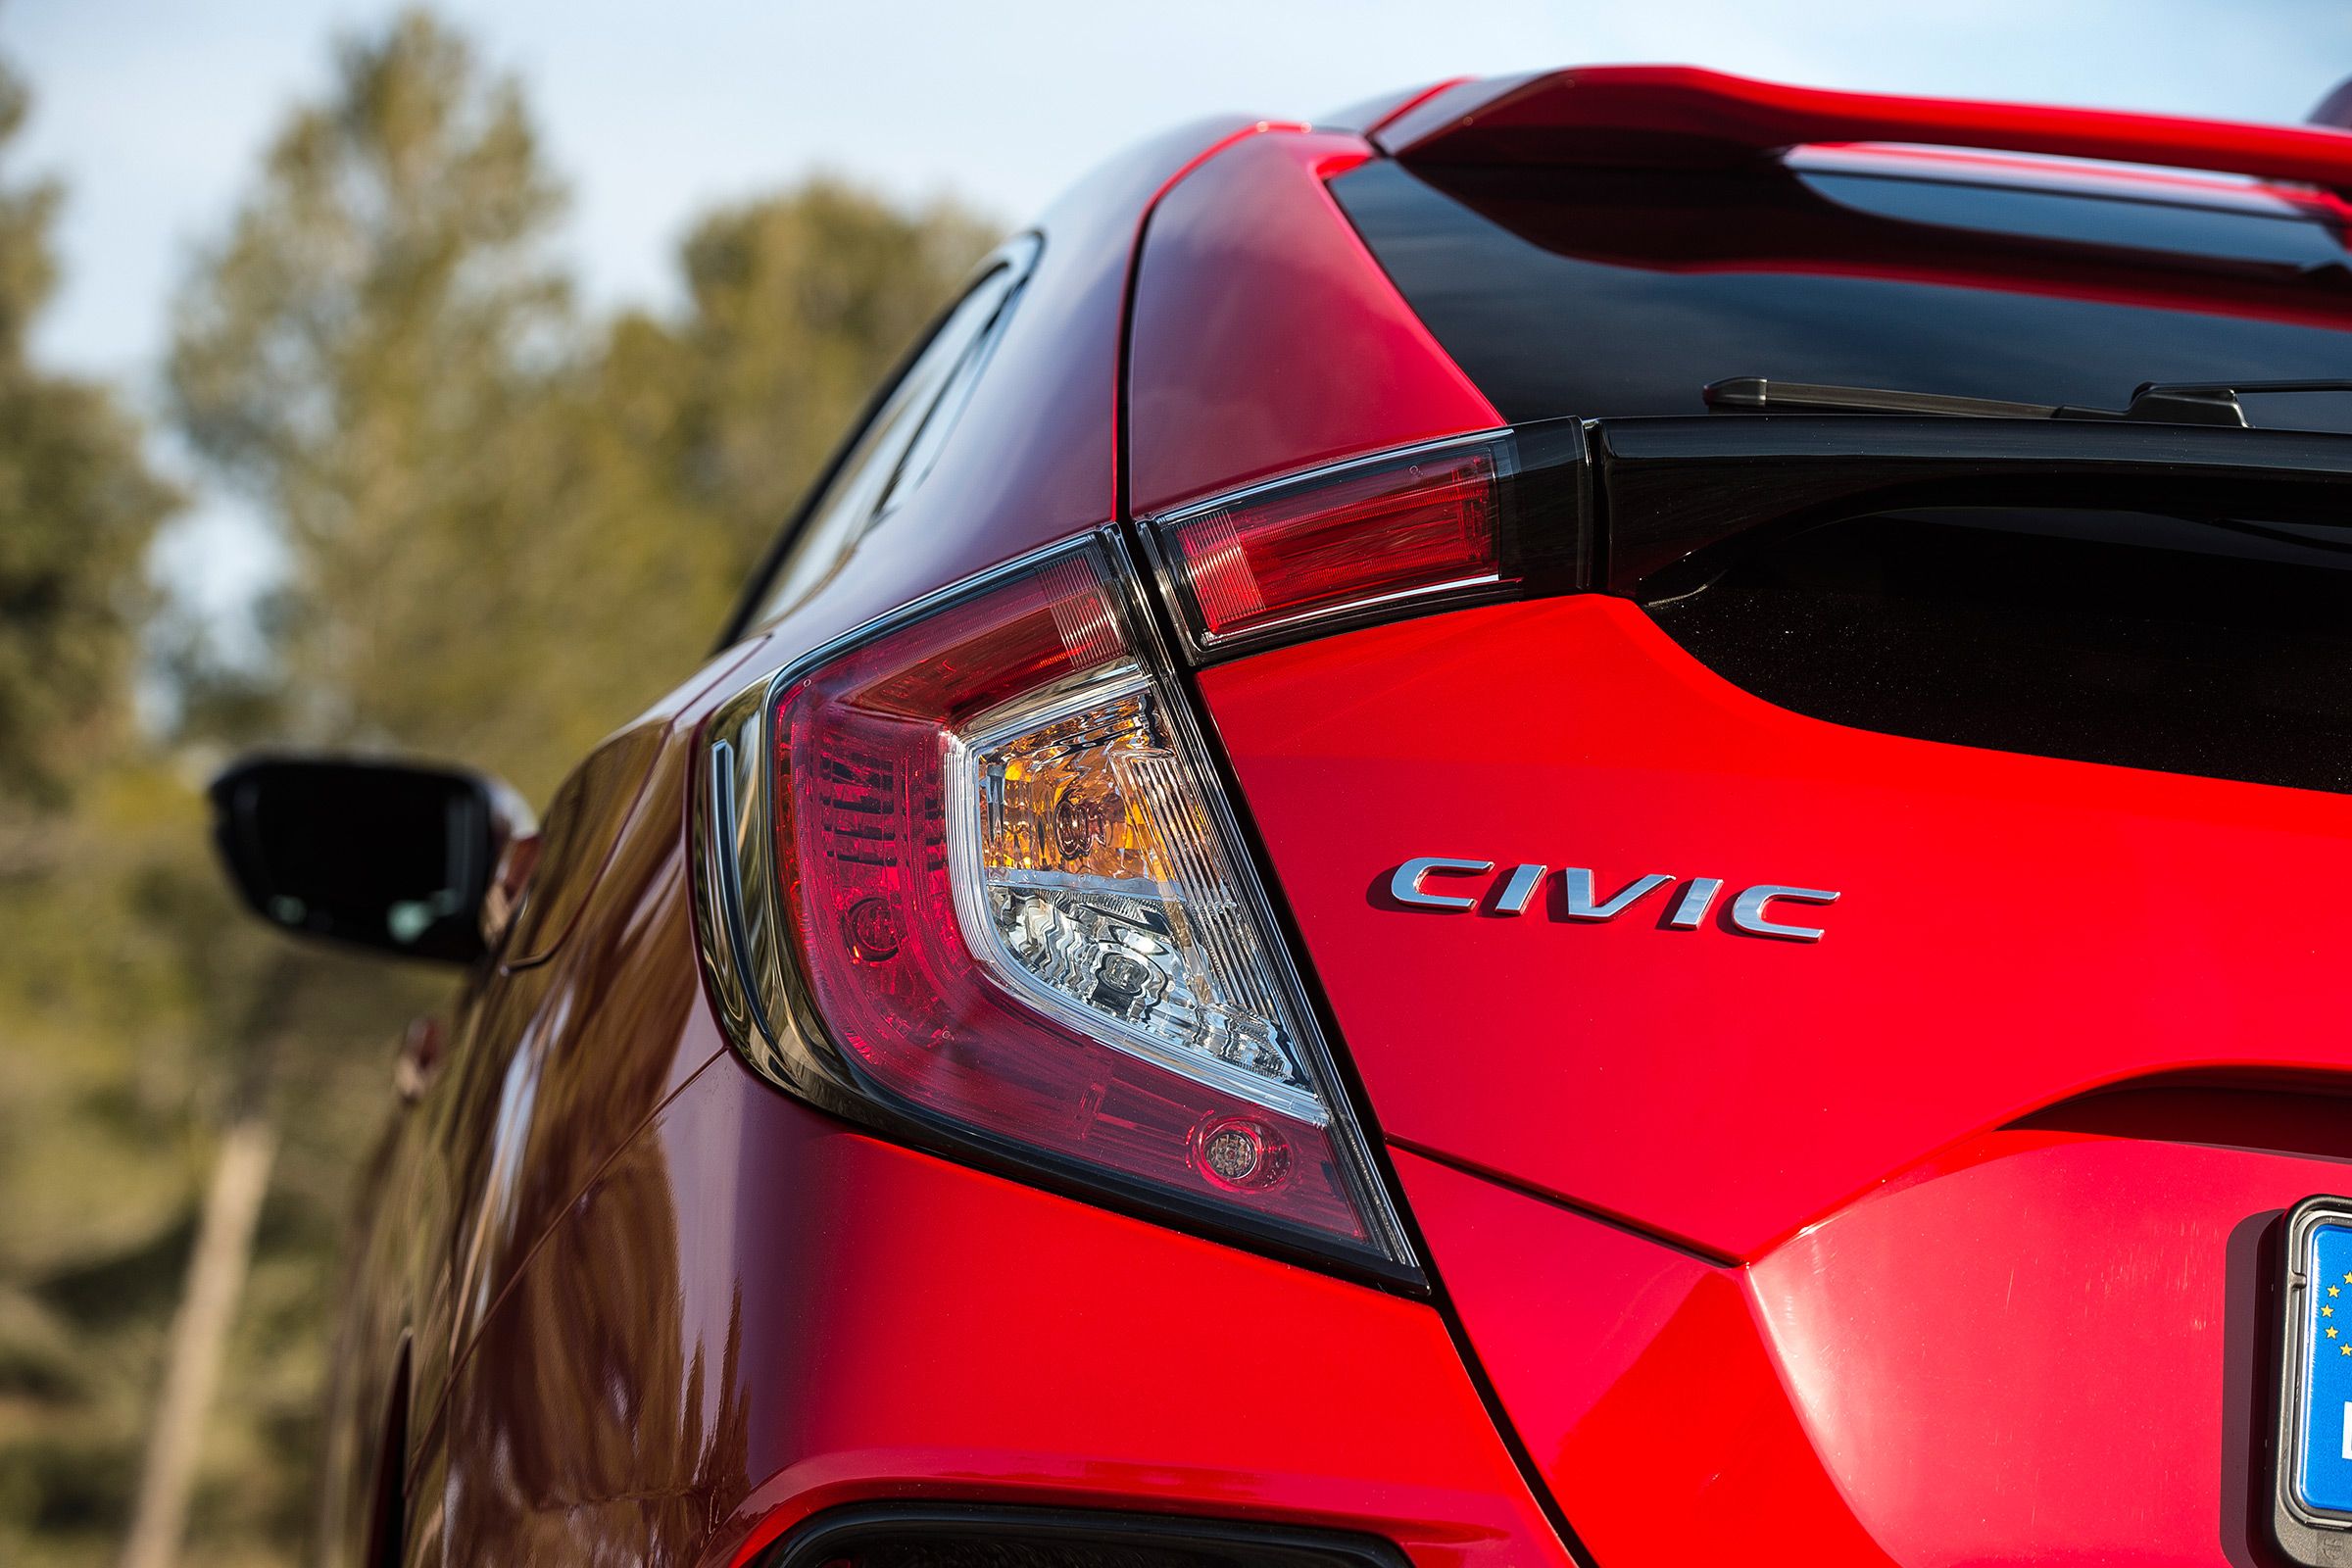 2017 Honda Civic Hatchback Red Exterior View Taillight (View 26 of 34)